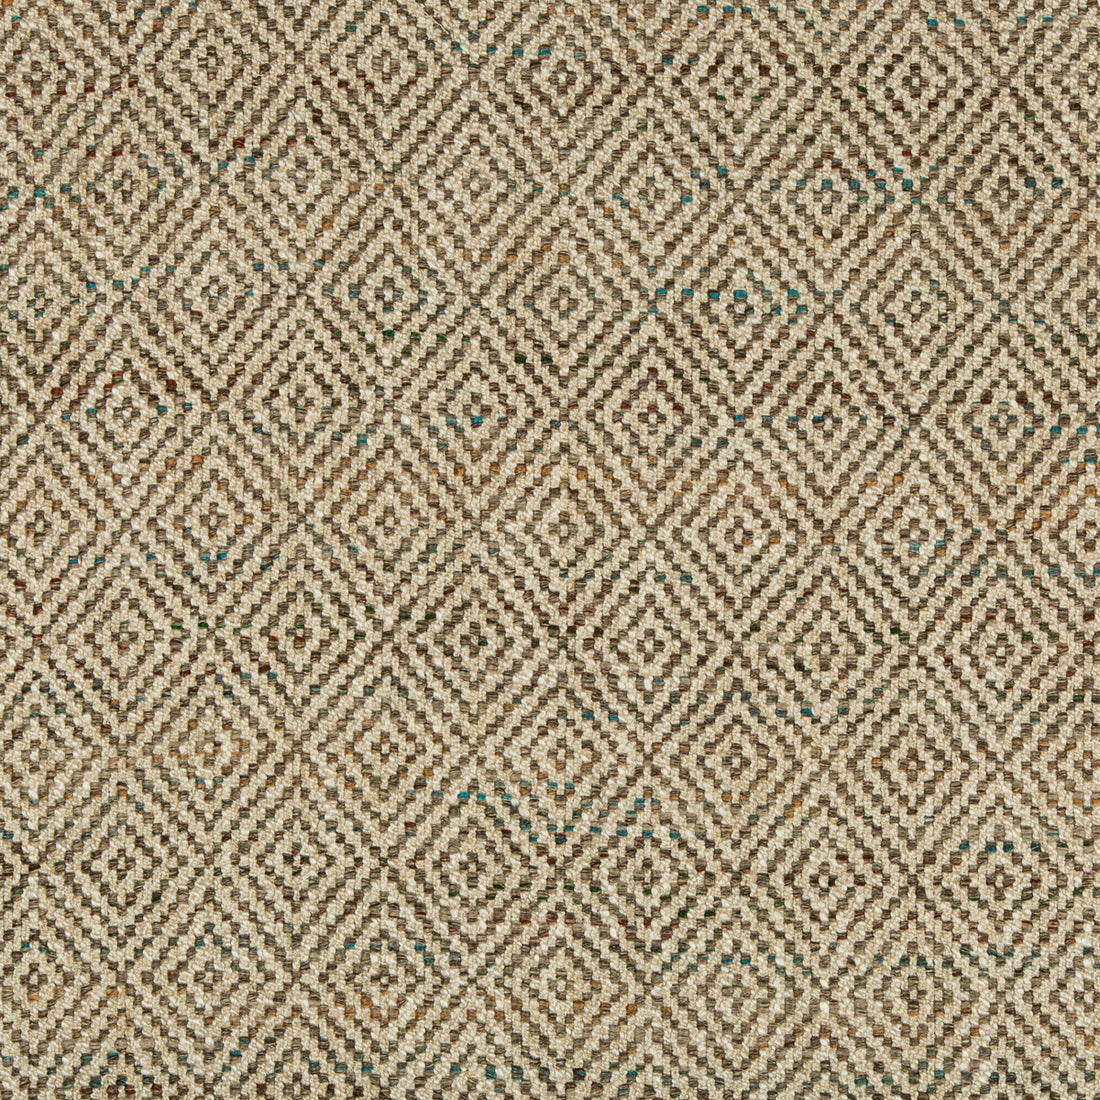 Izu fabric in multi color - pattern 35446.616.0 - by Kravet Couture in the Izu Collection collection